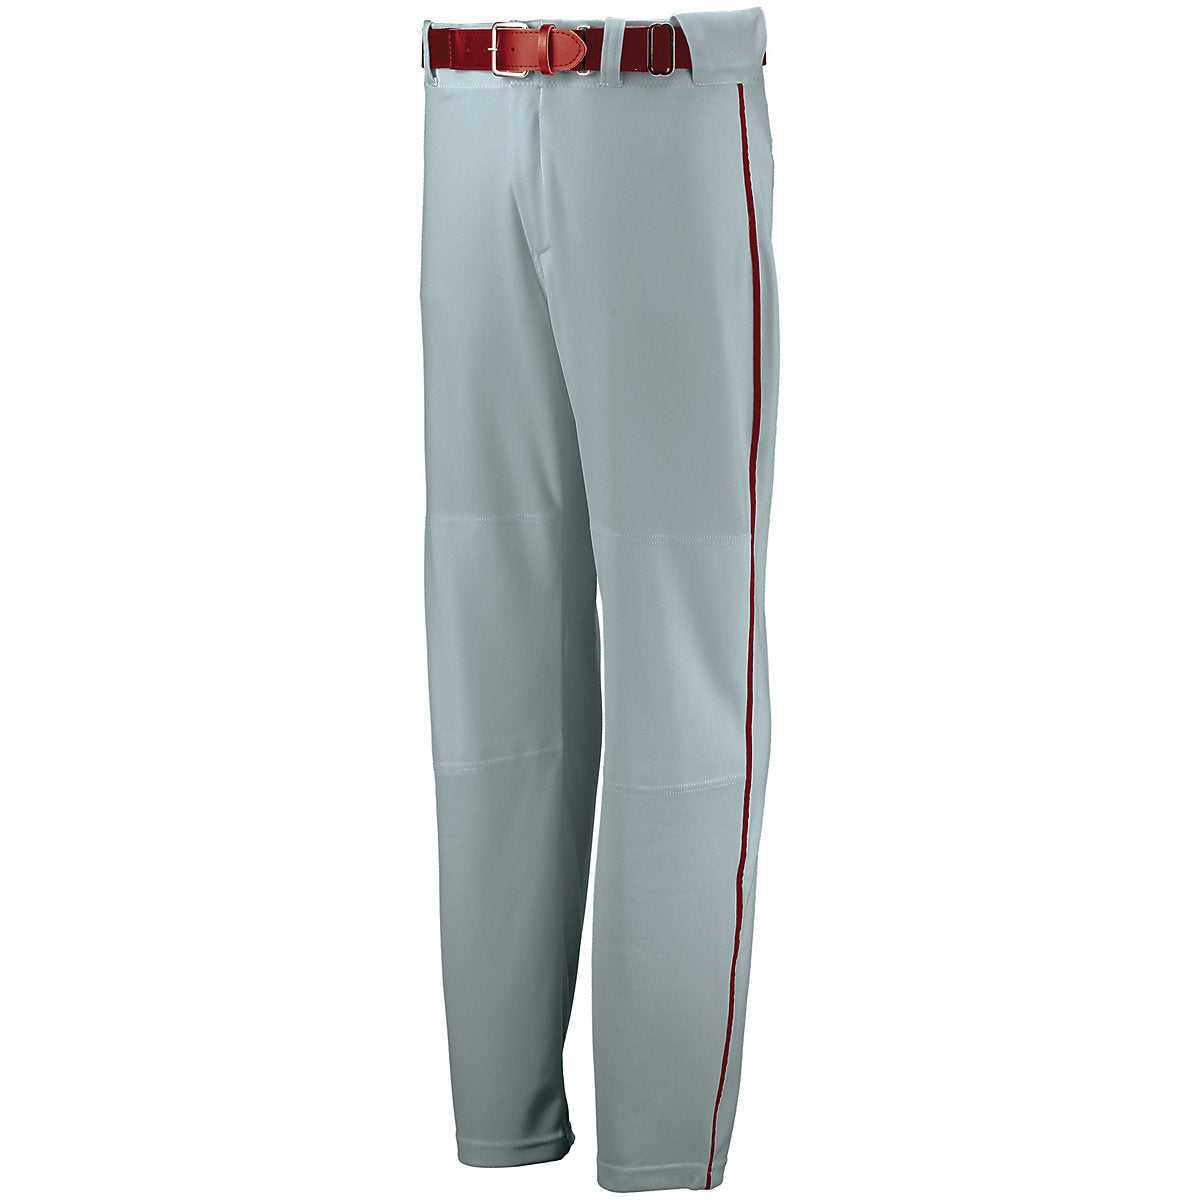 Russell 233L2M Open Bottom Piped Pant - Baseball Grey True Red - HIT a Double